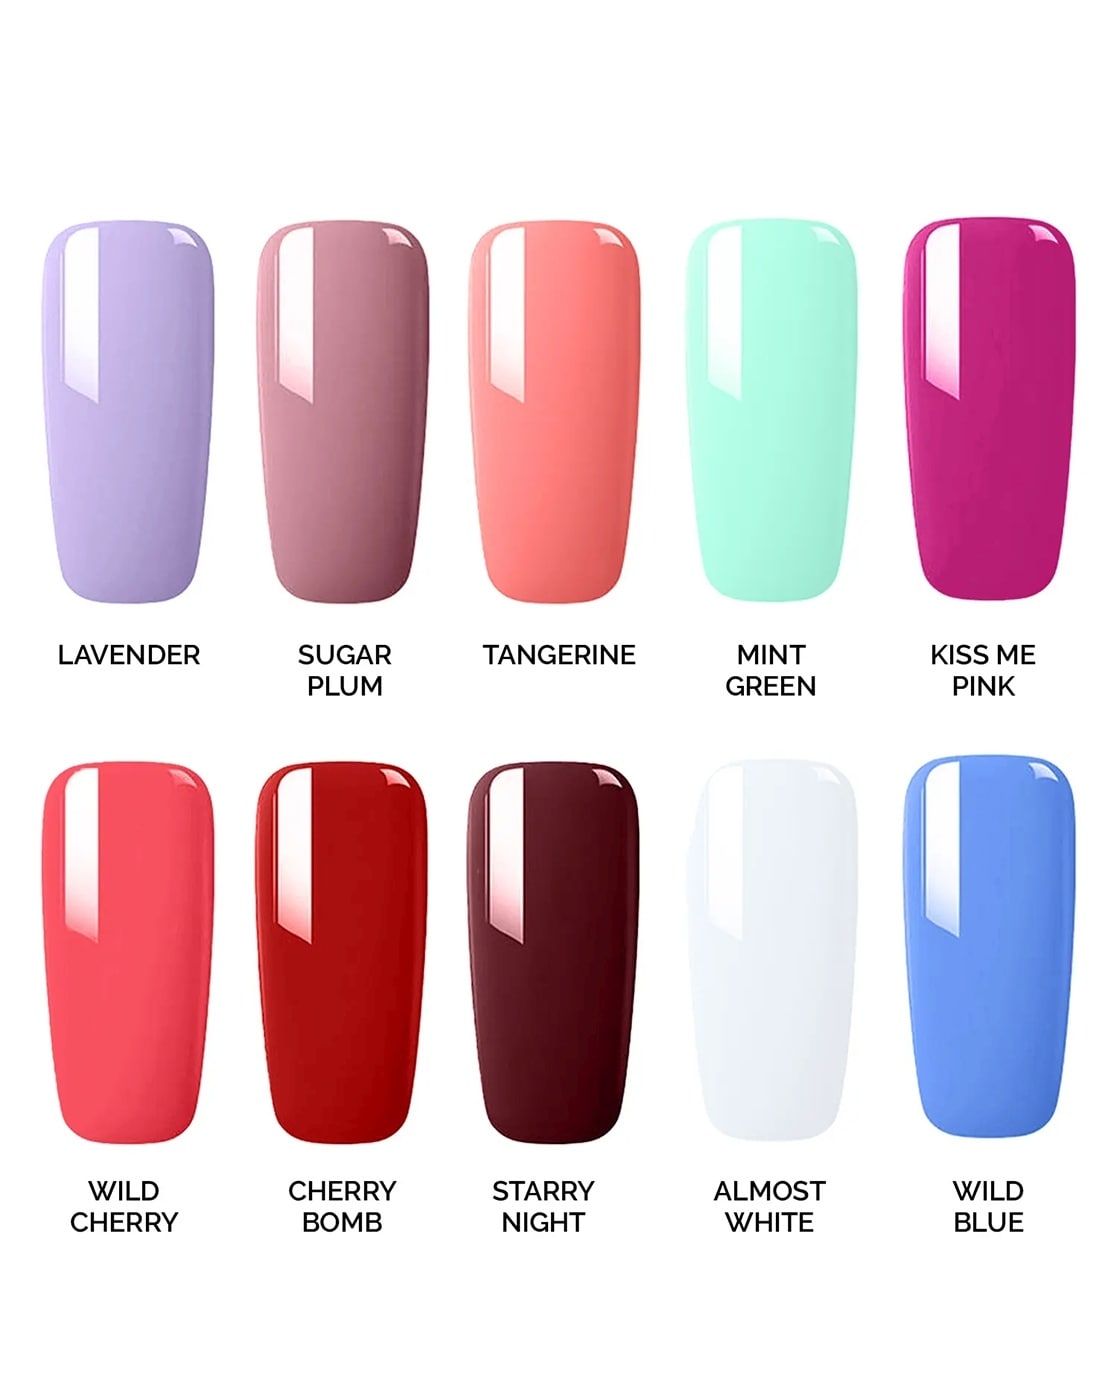 COLOR FLAME Trending Color Rich High Gloss Non UV Long Lasting New Nail  Polish Set Grey,Pink,White,Plum,Orchid,Blue,Pastel  Green,Rouge,Red,Turquoise,Coffee,Yellow - Price in India, Buy COLOR FLAME  Trending Color Rich High Gloss Non UV Long